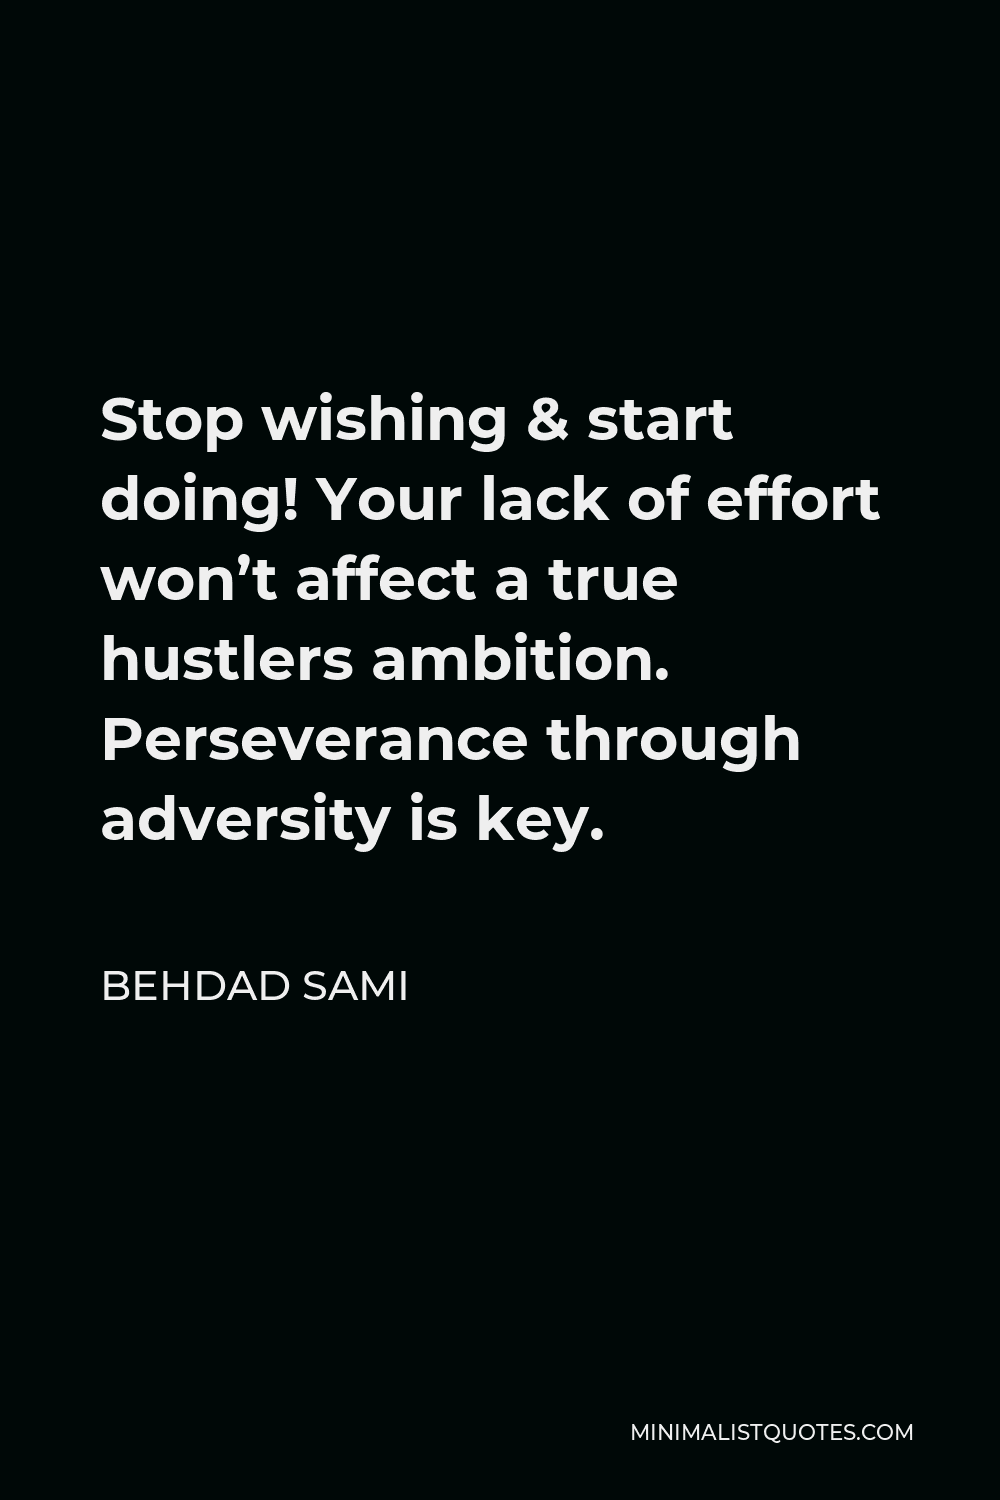 Behdad Sami Quote - Stop wishing & start doing! Your lack of effort won’t affect a true hustlers ambition. Perseverance through adversity is key.